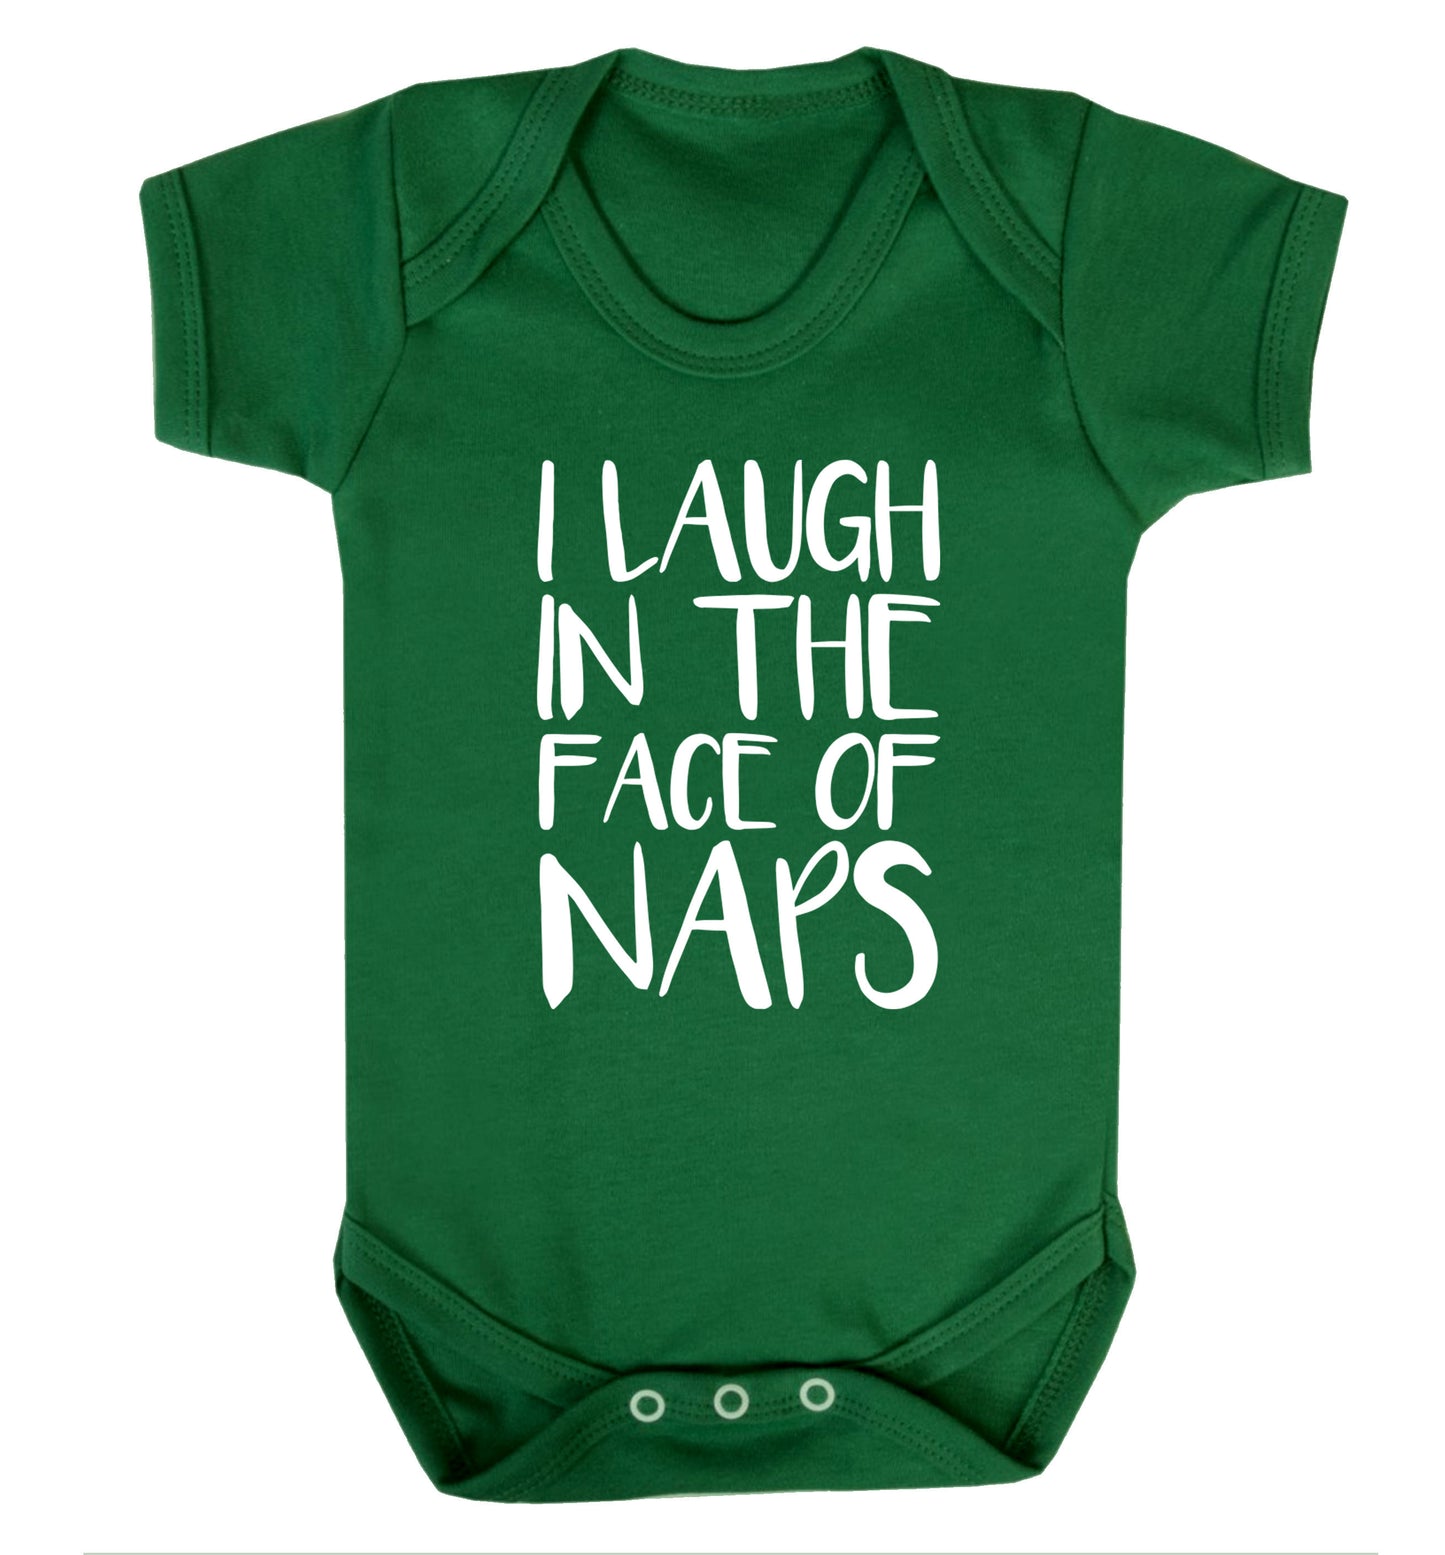 I laugh in the face of naps Baby Vest green 18-24 months